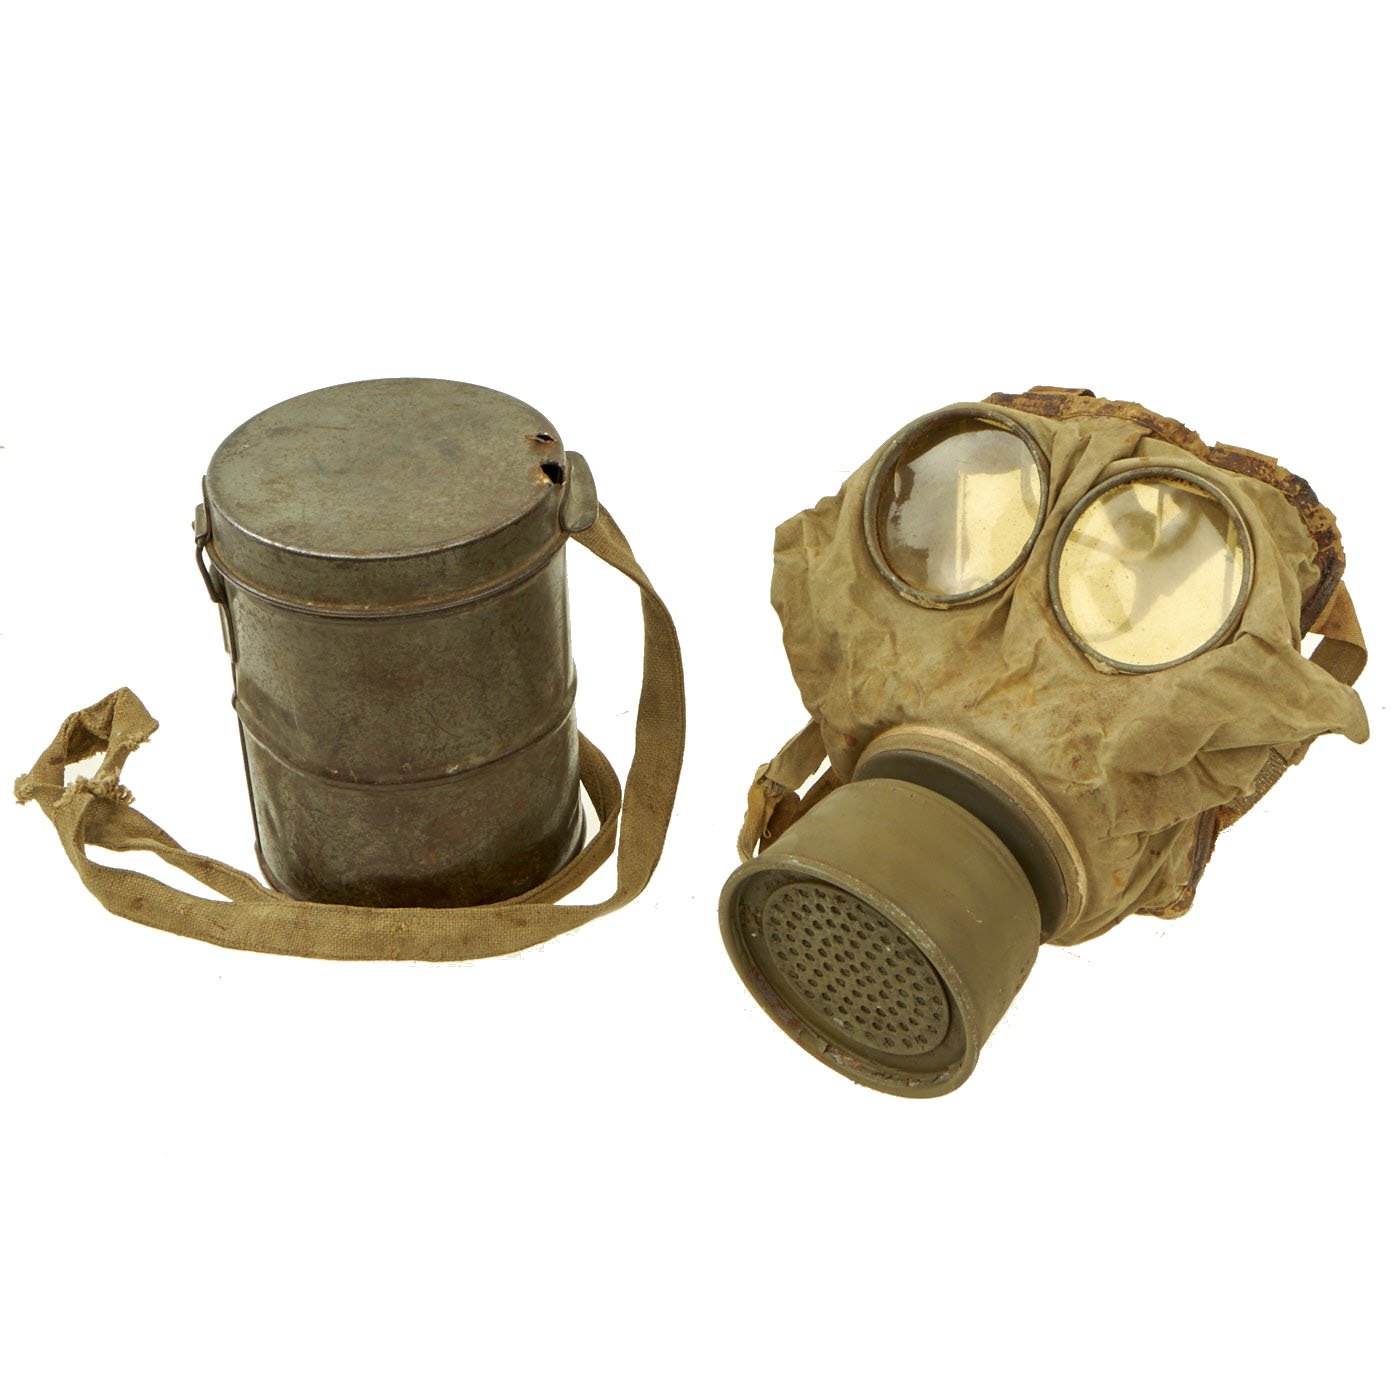 Imperial Gummimaske GM-15 Rubberized Gas Mask with – International Military Antiques